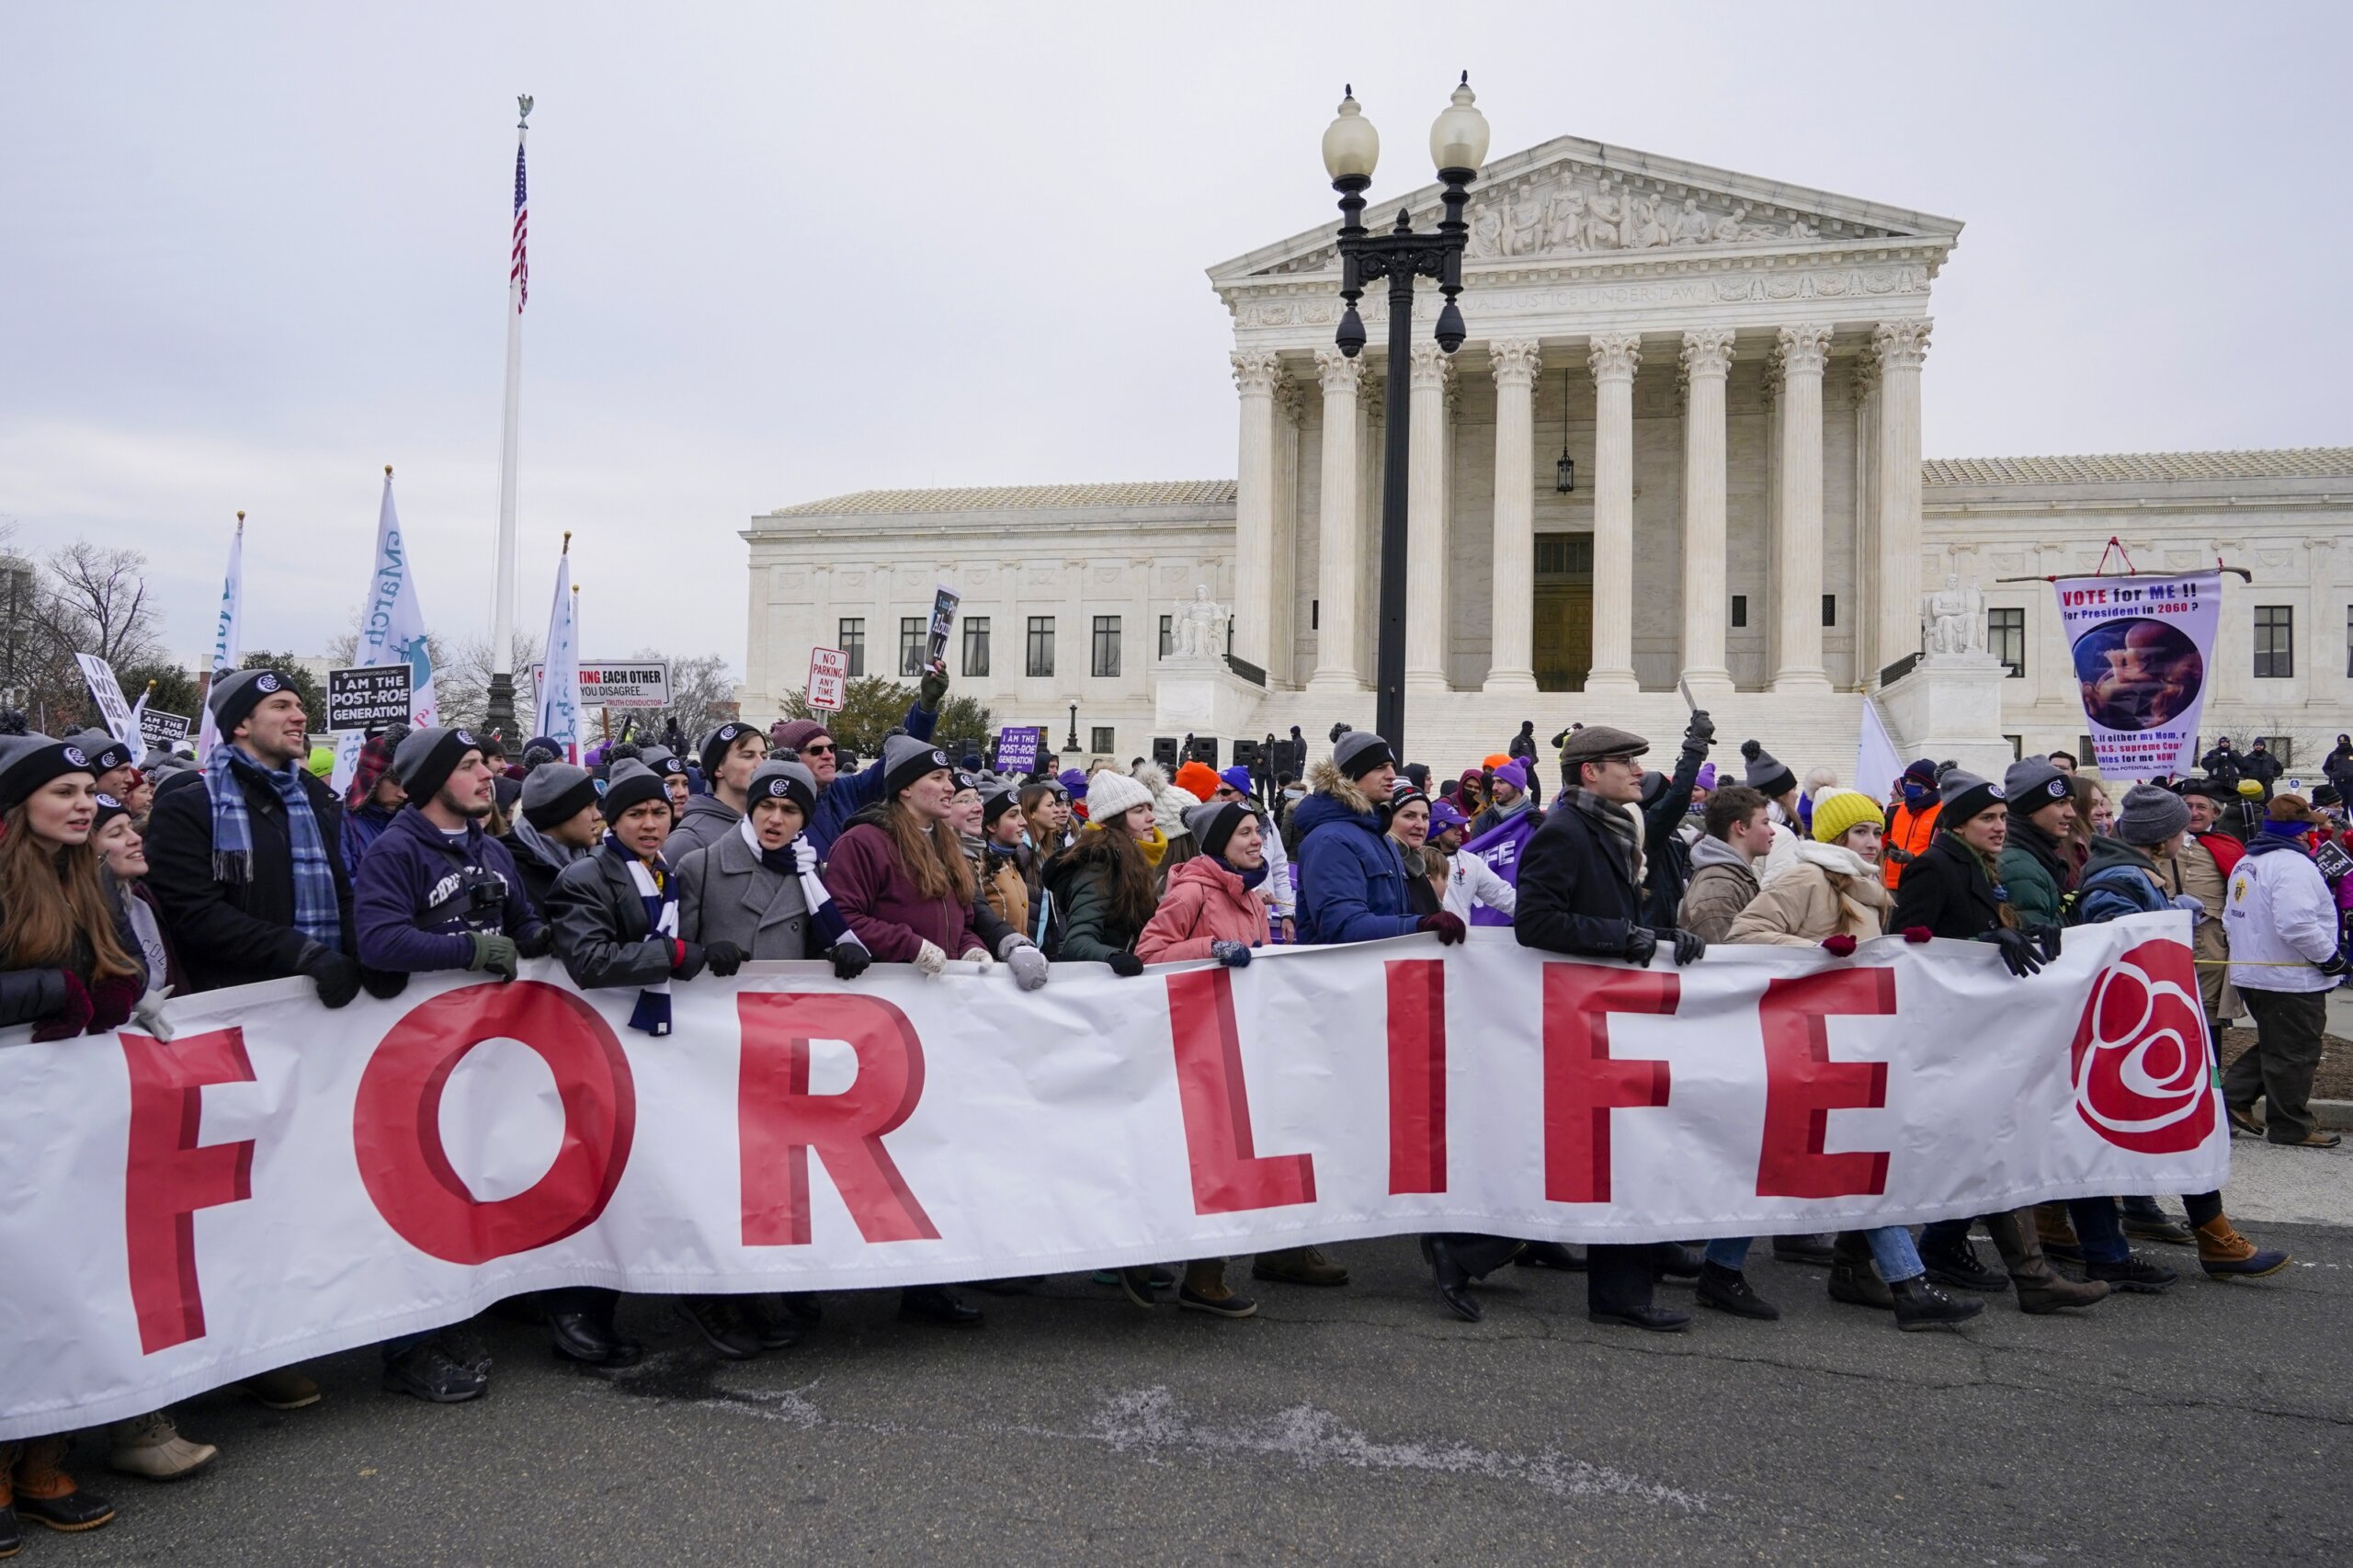 March for Life returns to DC with new post-Roe v. Wade focus